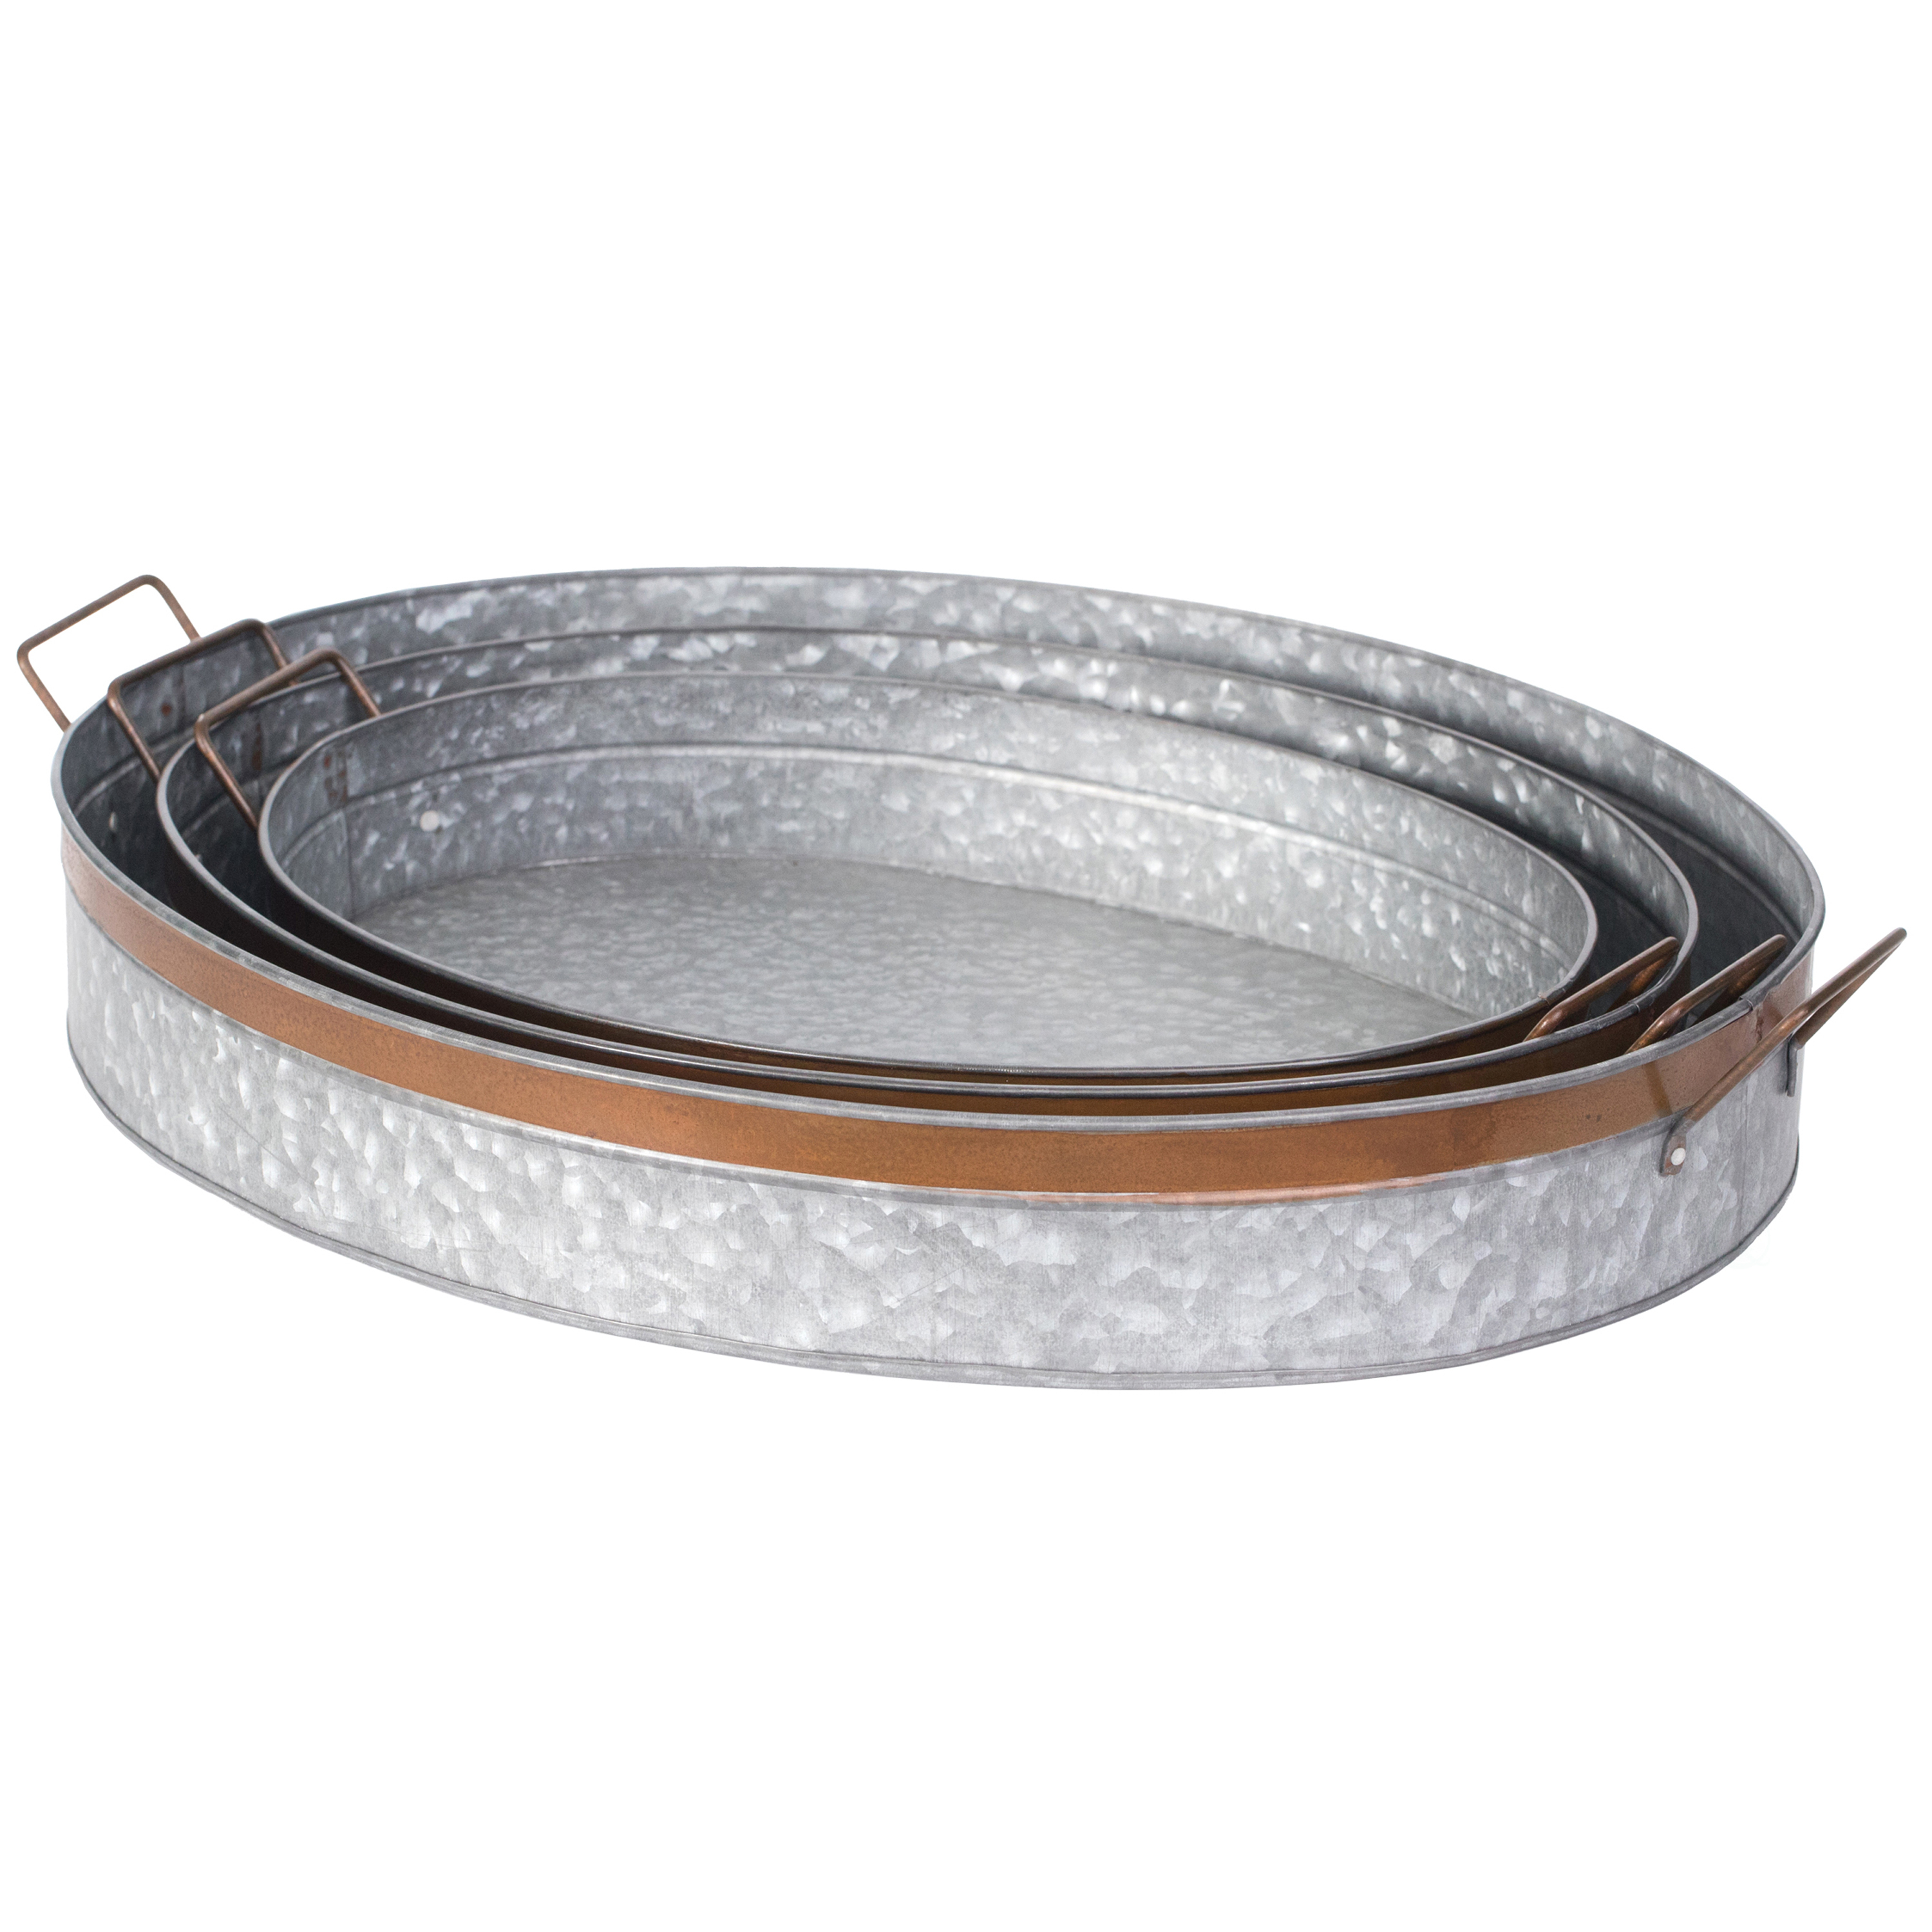 Galvanized Metal Oval Rustic Serving Tray With Handles - Set Of 3